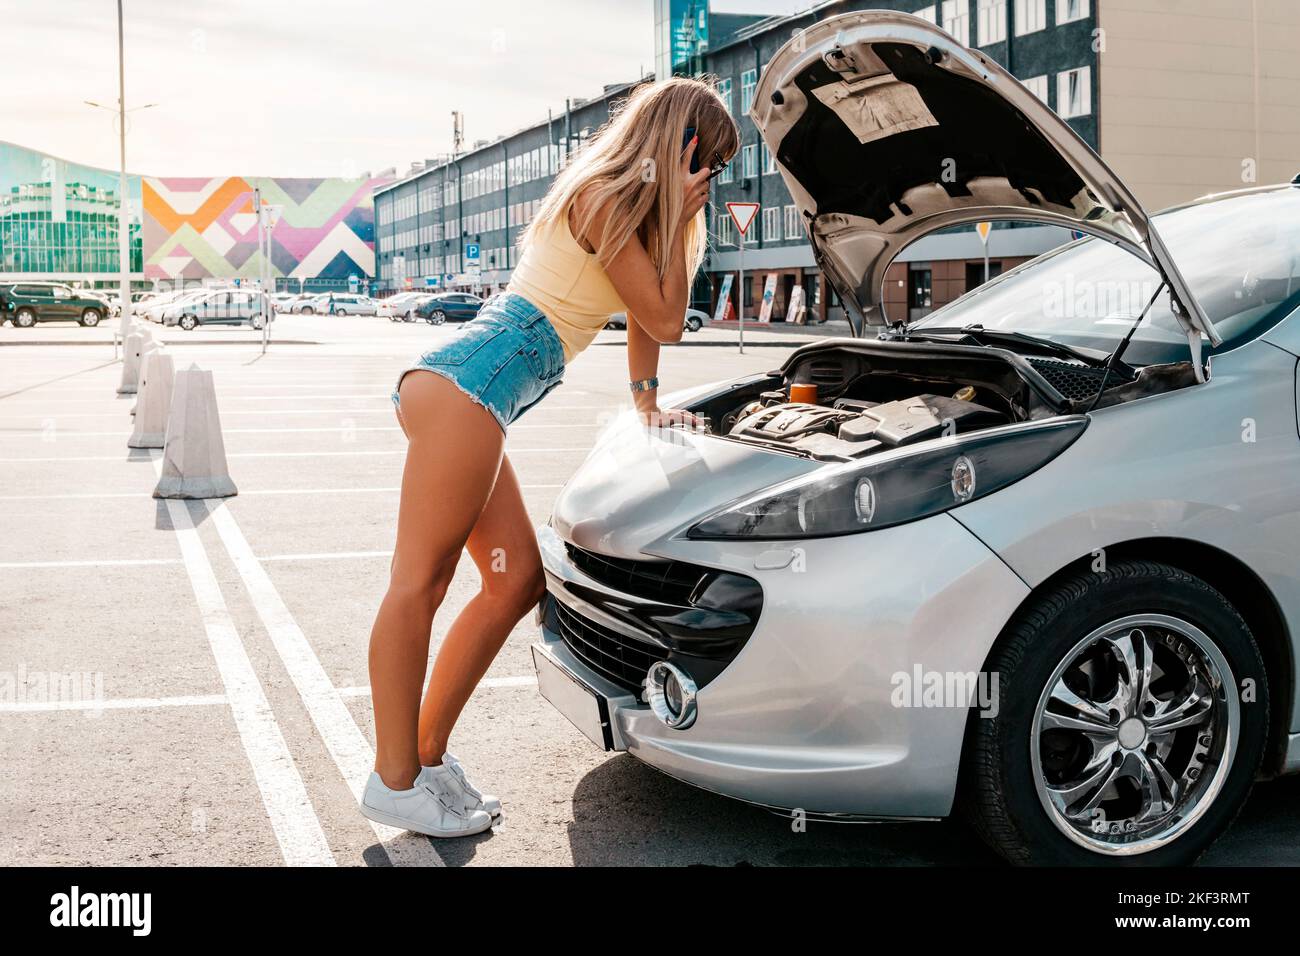 The woman stood near the car that was broken on the road while traveling. open the hood of the gray car. Stock Photo